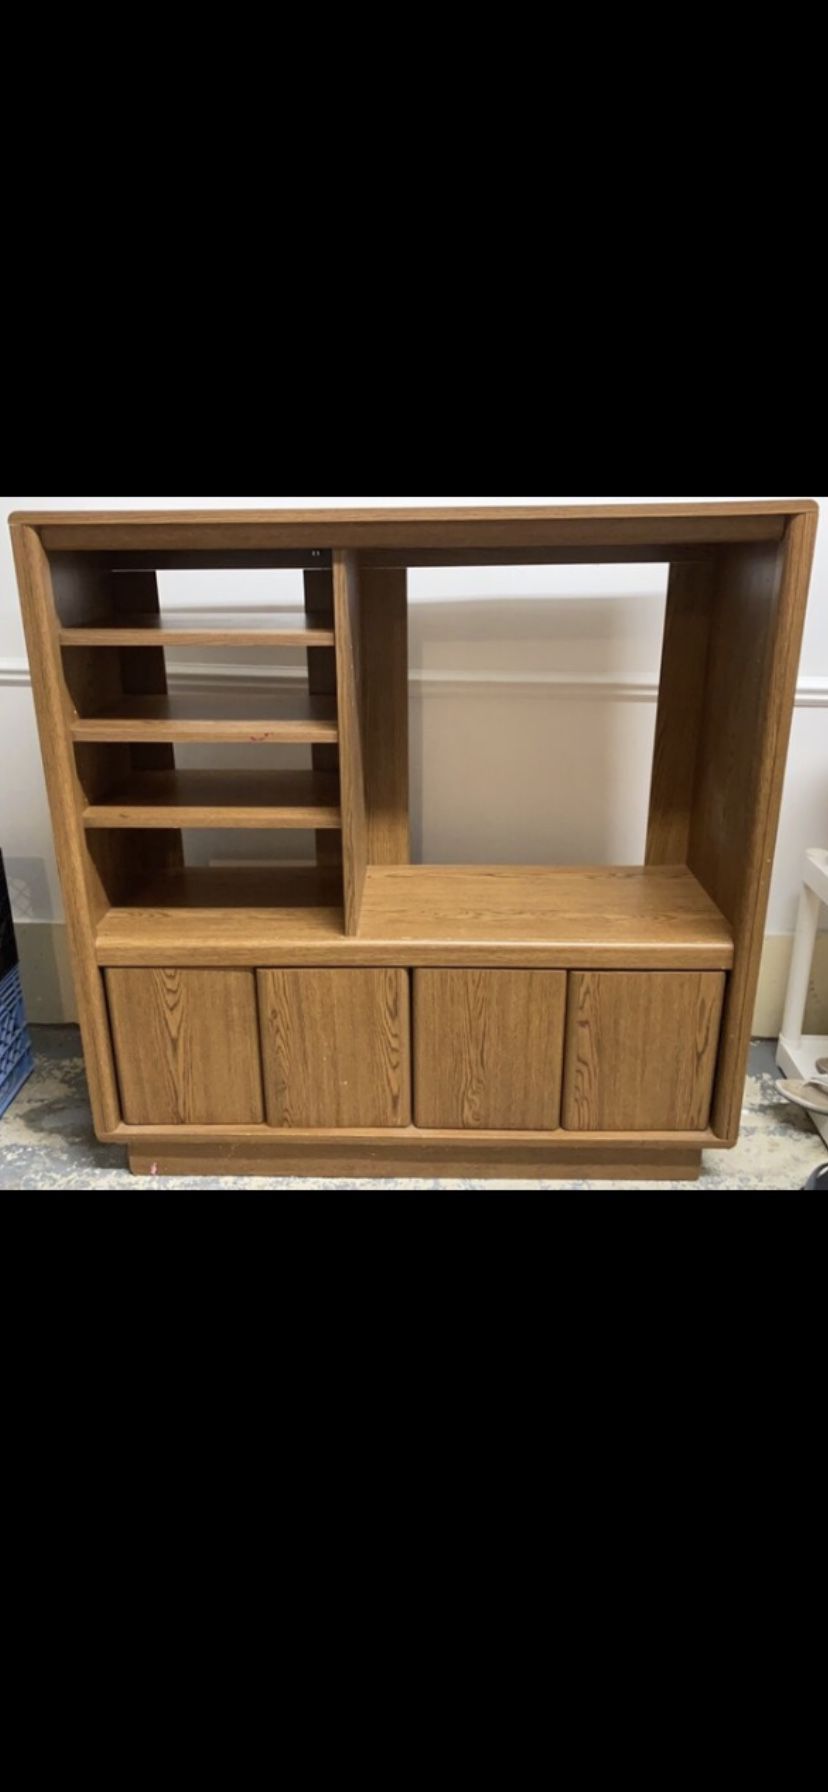 TV stand with shelves and 4 doors